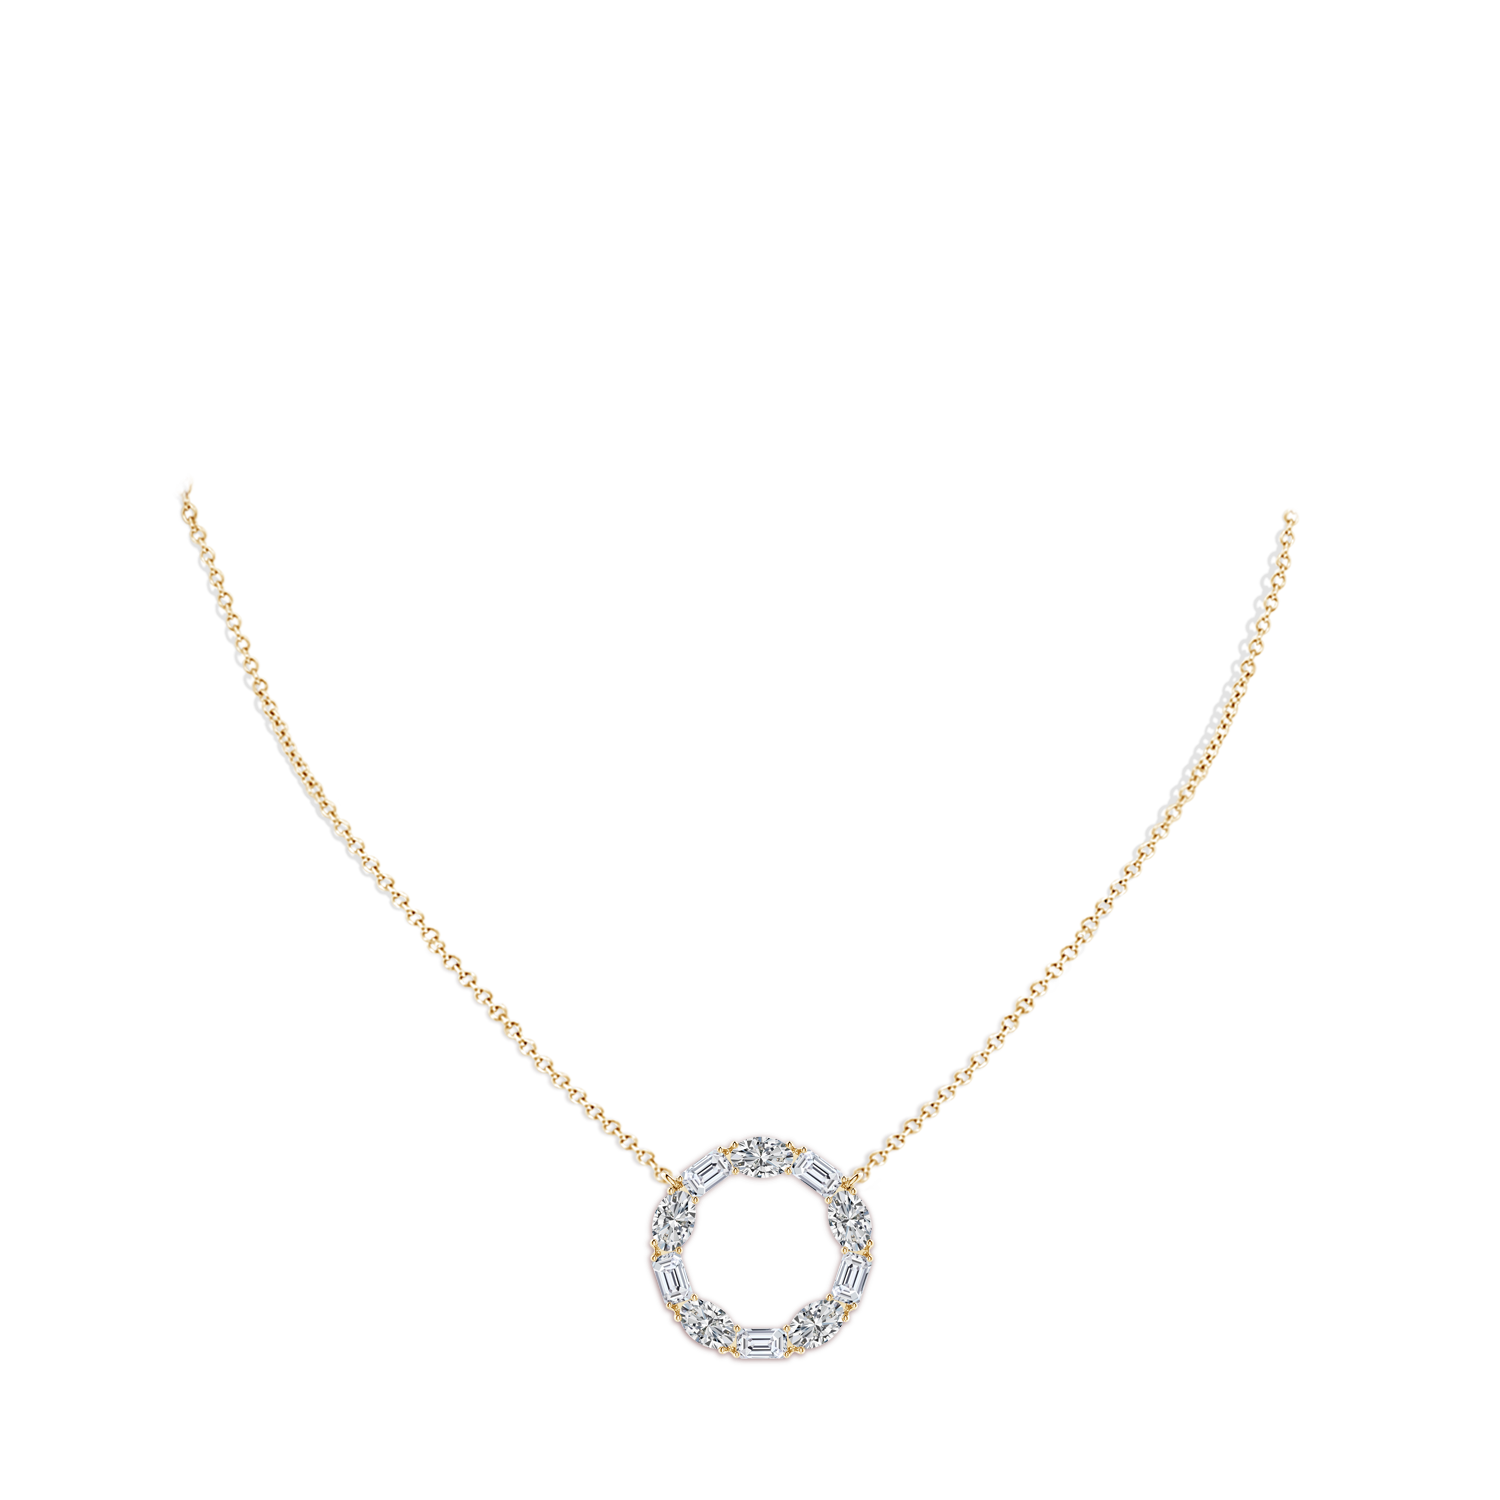 H, SI2 / 3.75 CT / 14 KT Yellow Gold